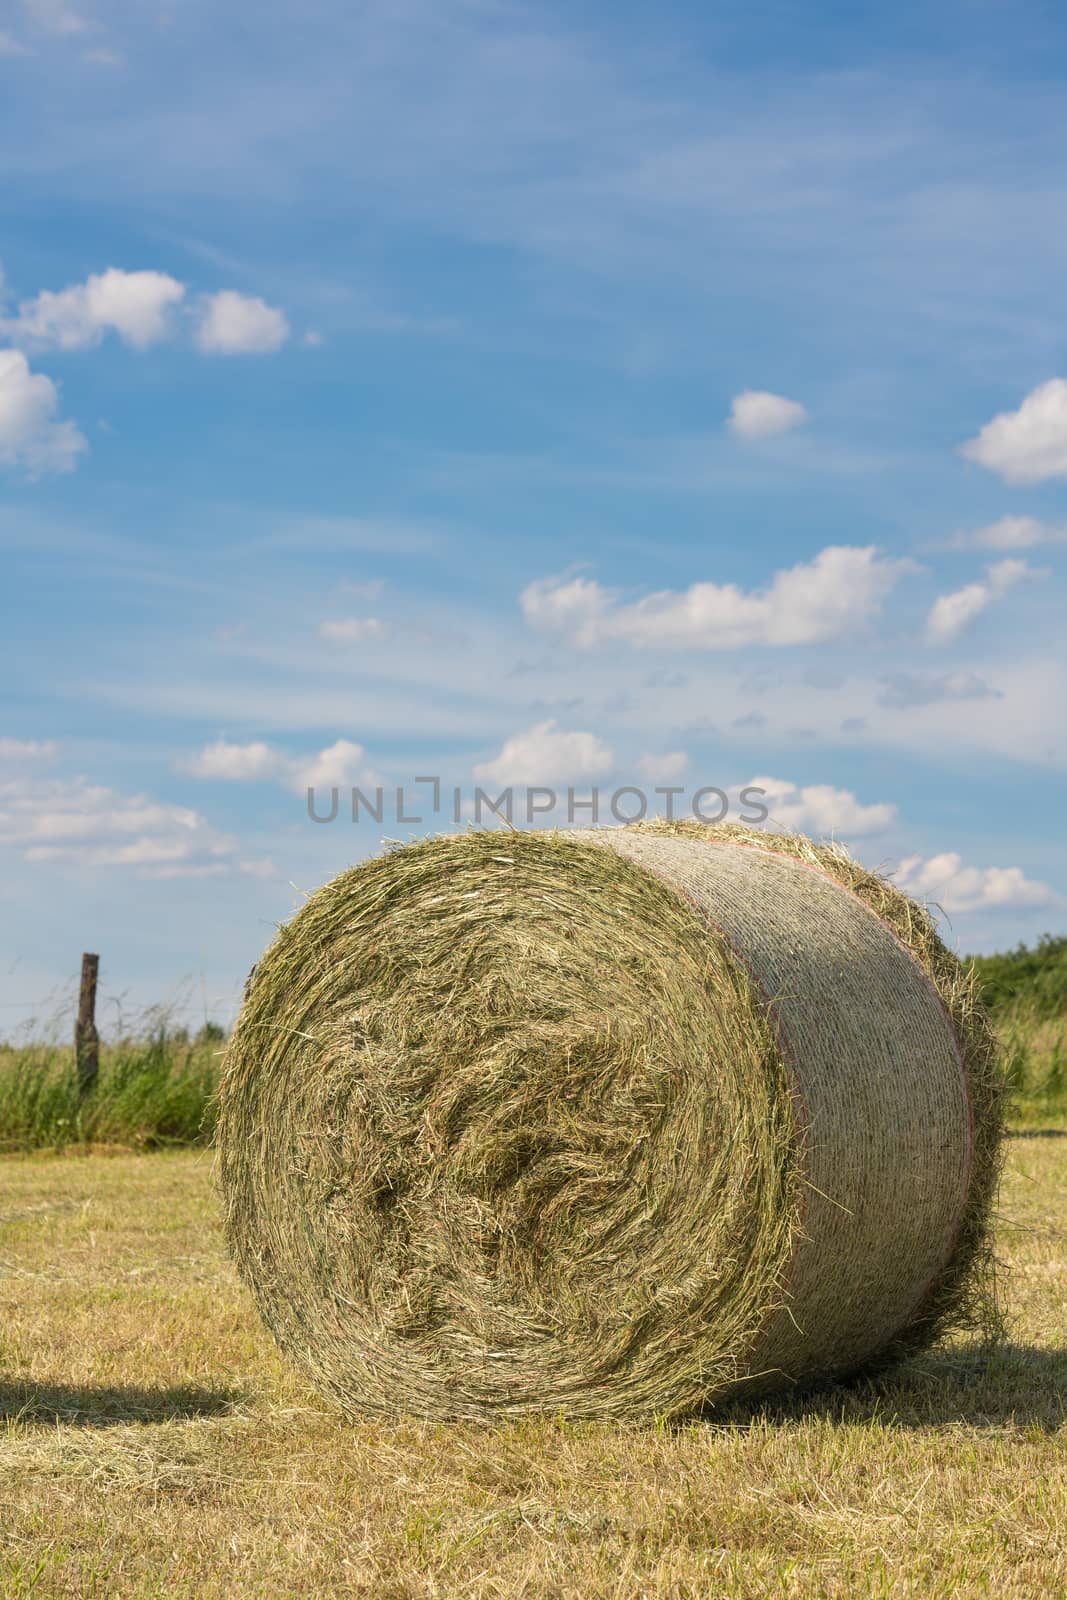 Panoramic image of hay rolls on a meadow against blue sky, agriculture, Germany